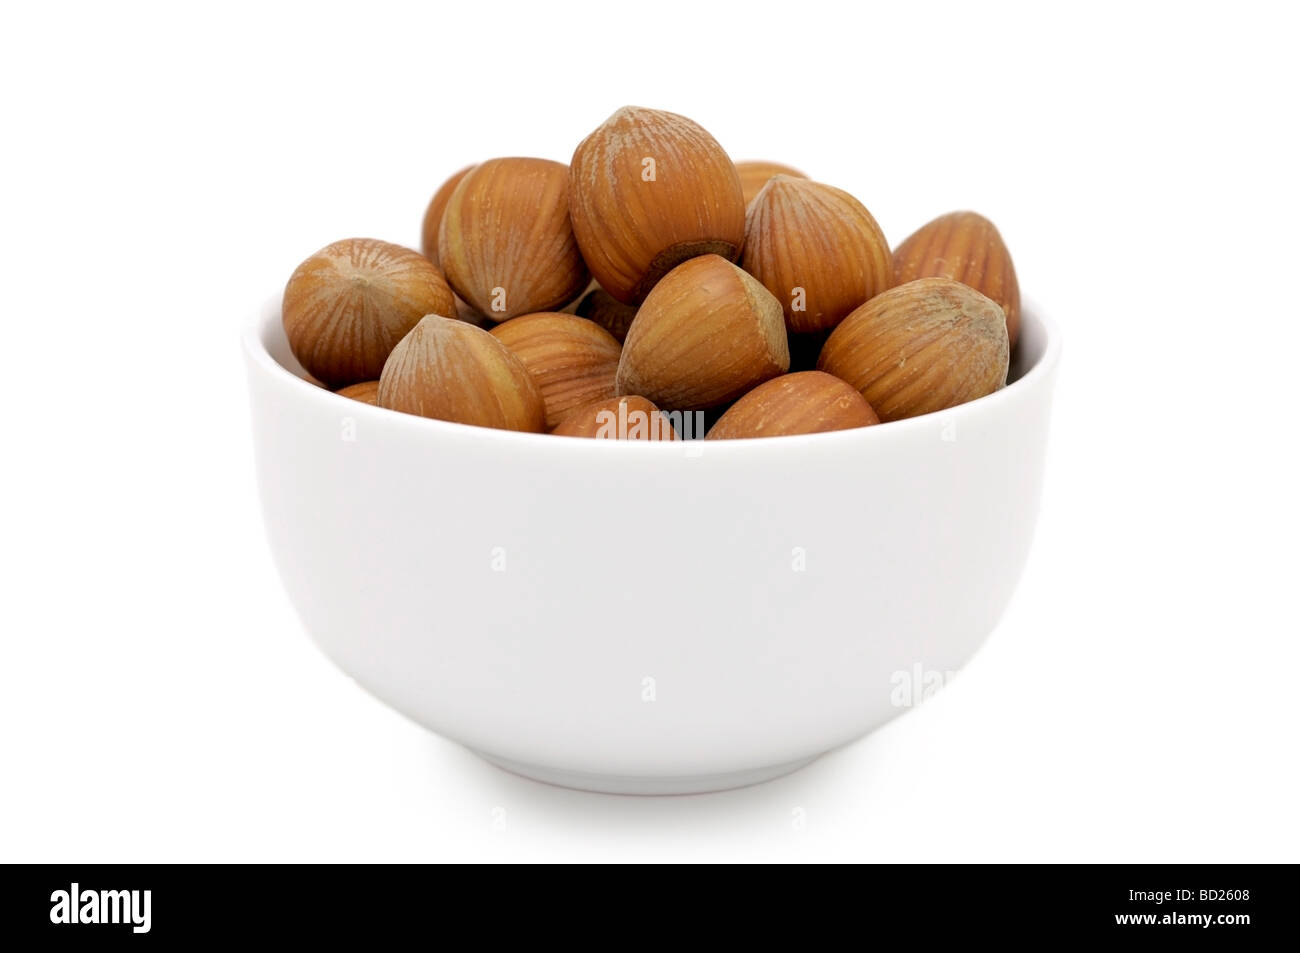 Hazelnuts / Filberts in a Bowl Stock Photo